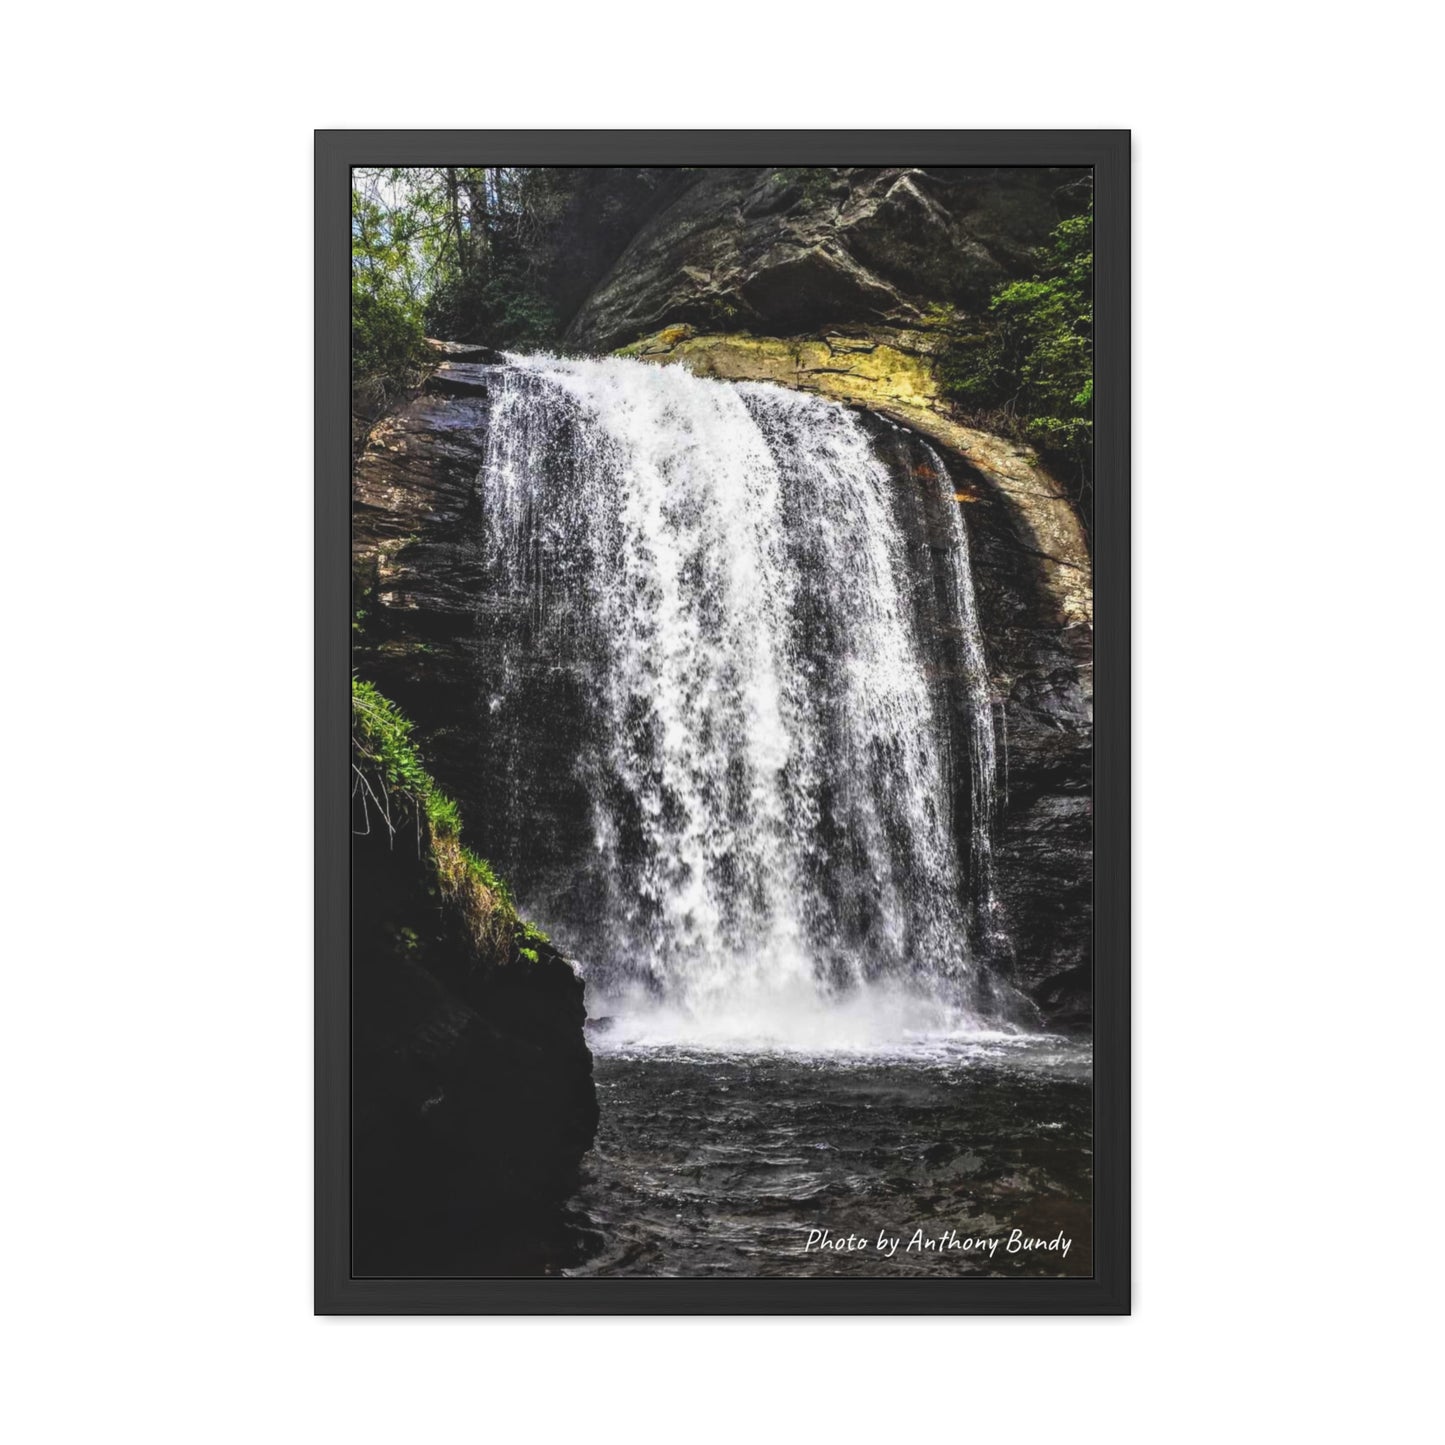 Framed Poster of Waterfall in Asheville, NC, front view.